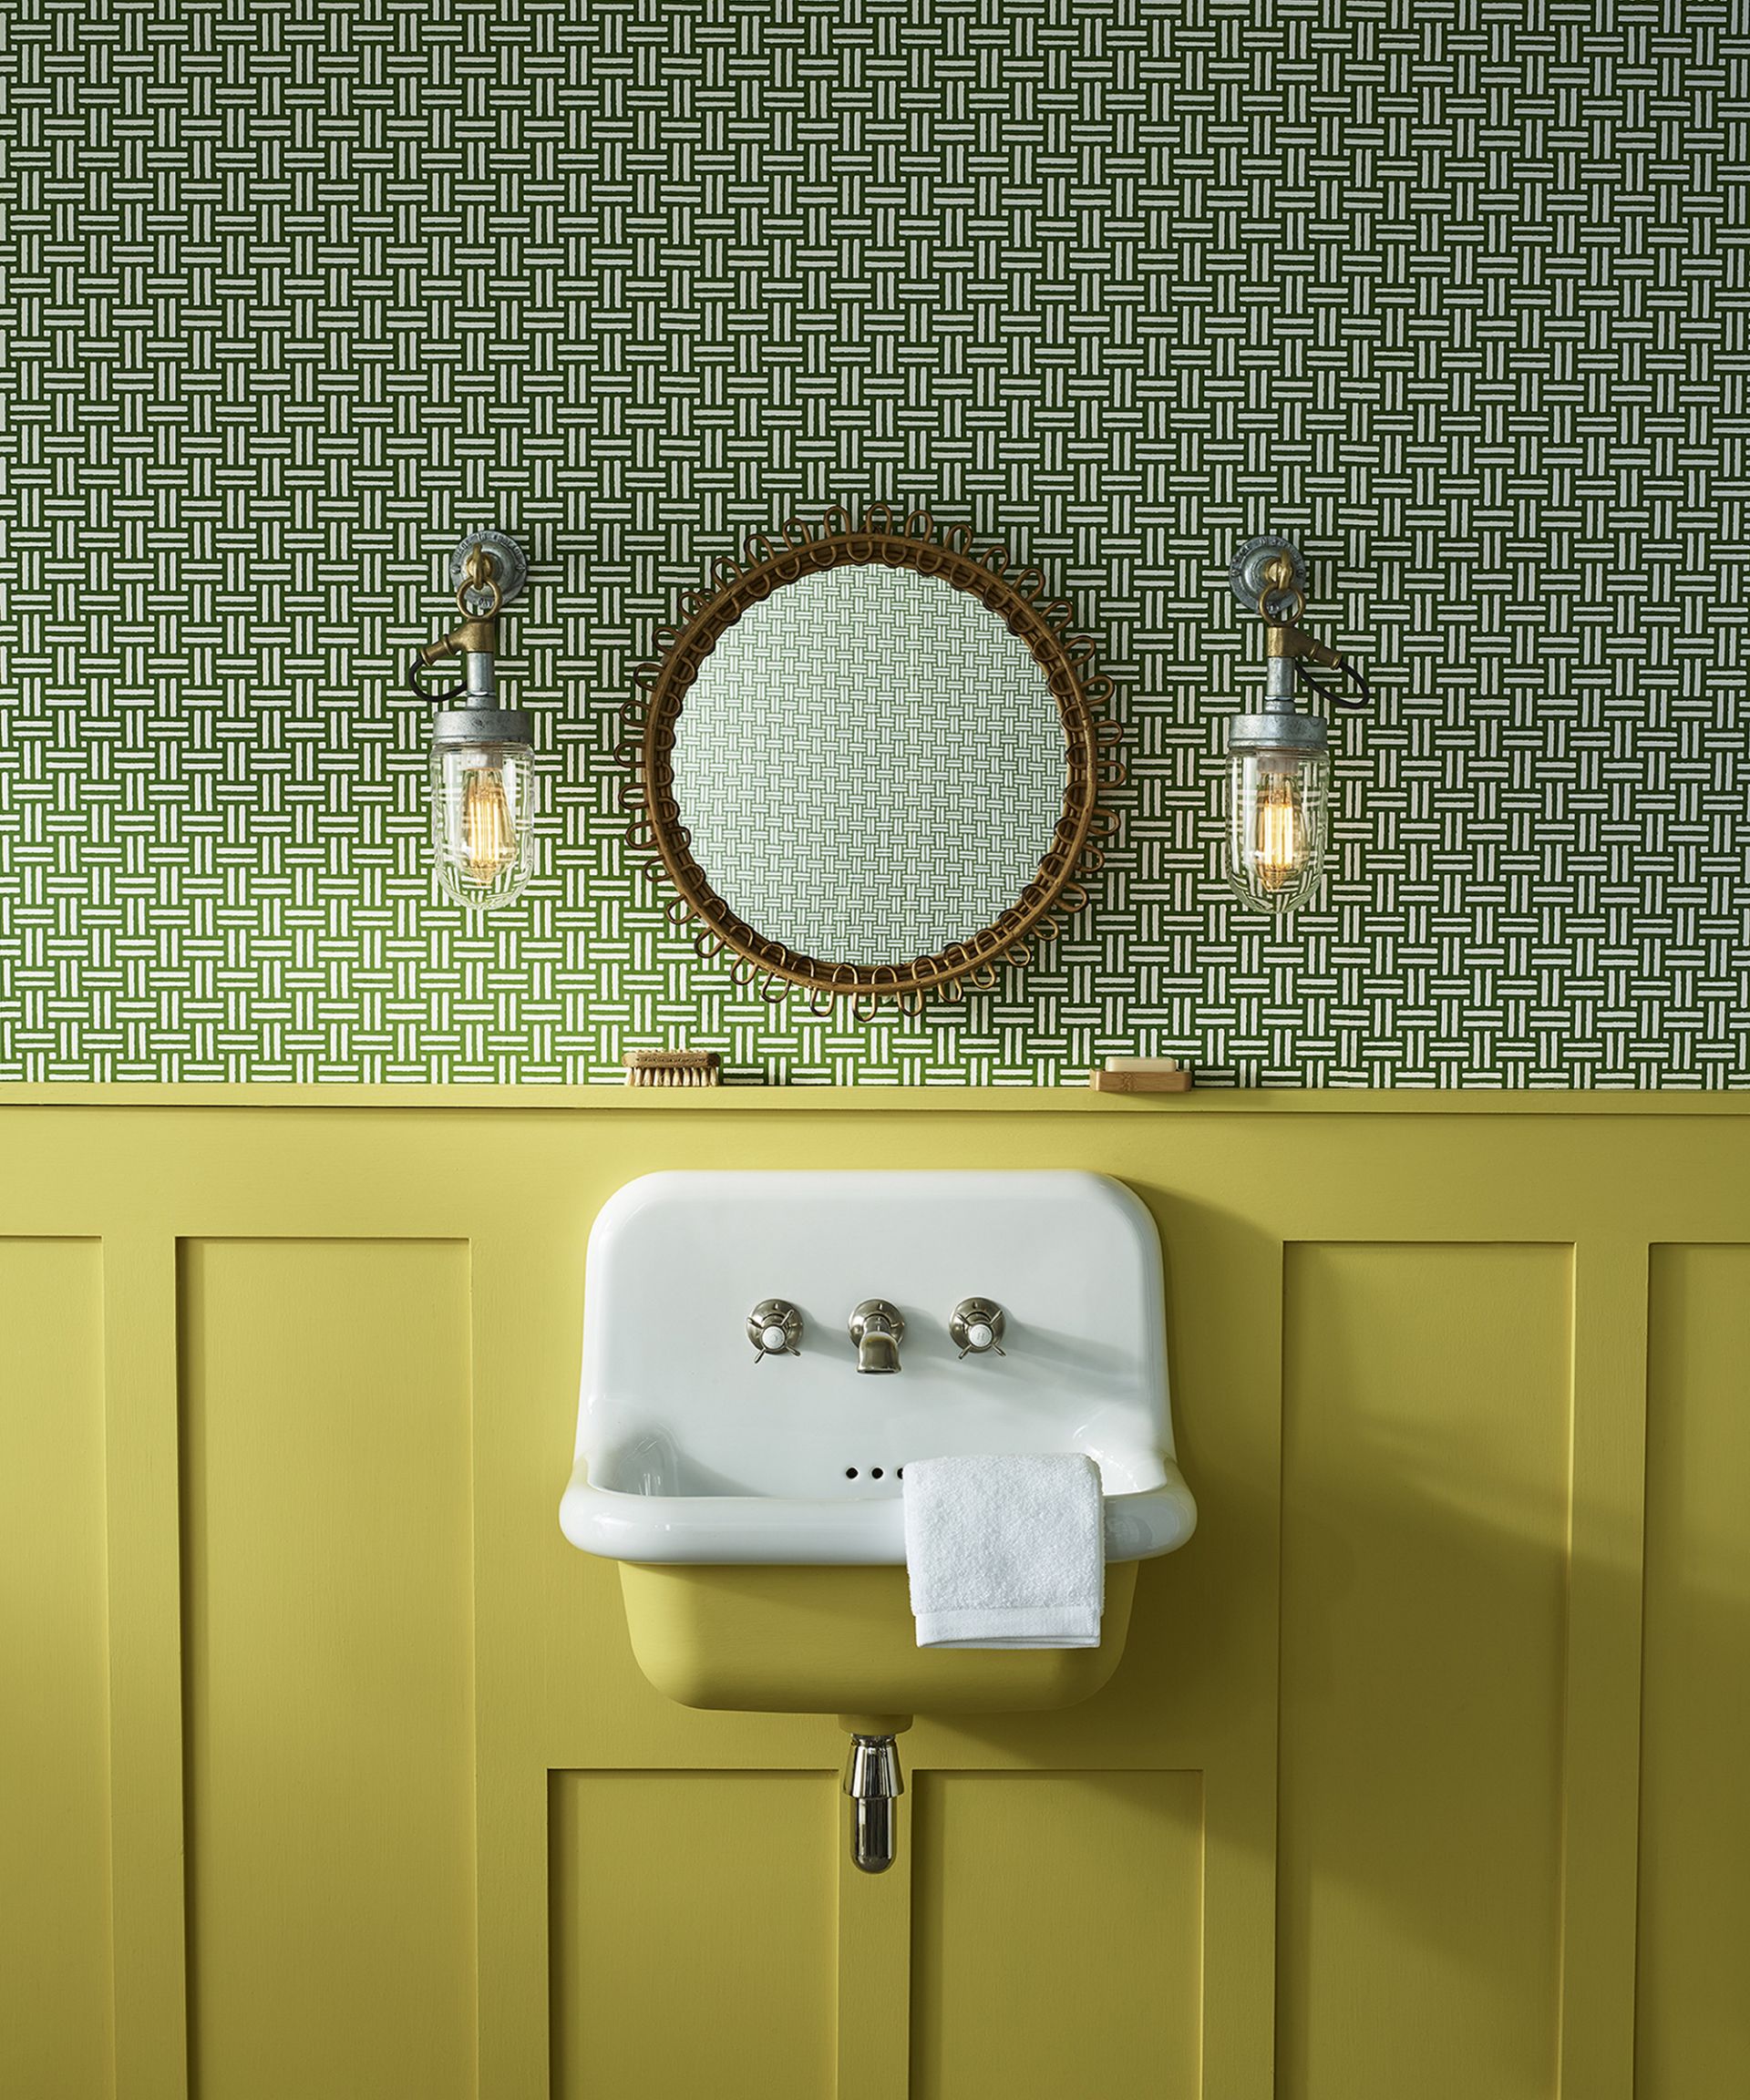 <p>                     Bright pops of color don’t have to be restricted to the wall anymore, with options to have colorful washbasins and toilets, tiles and even brassware greater than ever before. Warm, earthy tones create a sense of calm, whereas bolder hues can feel more energizing.                   </p>